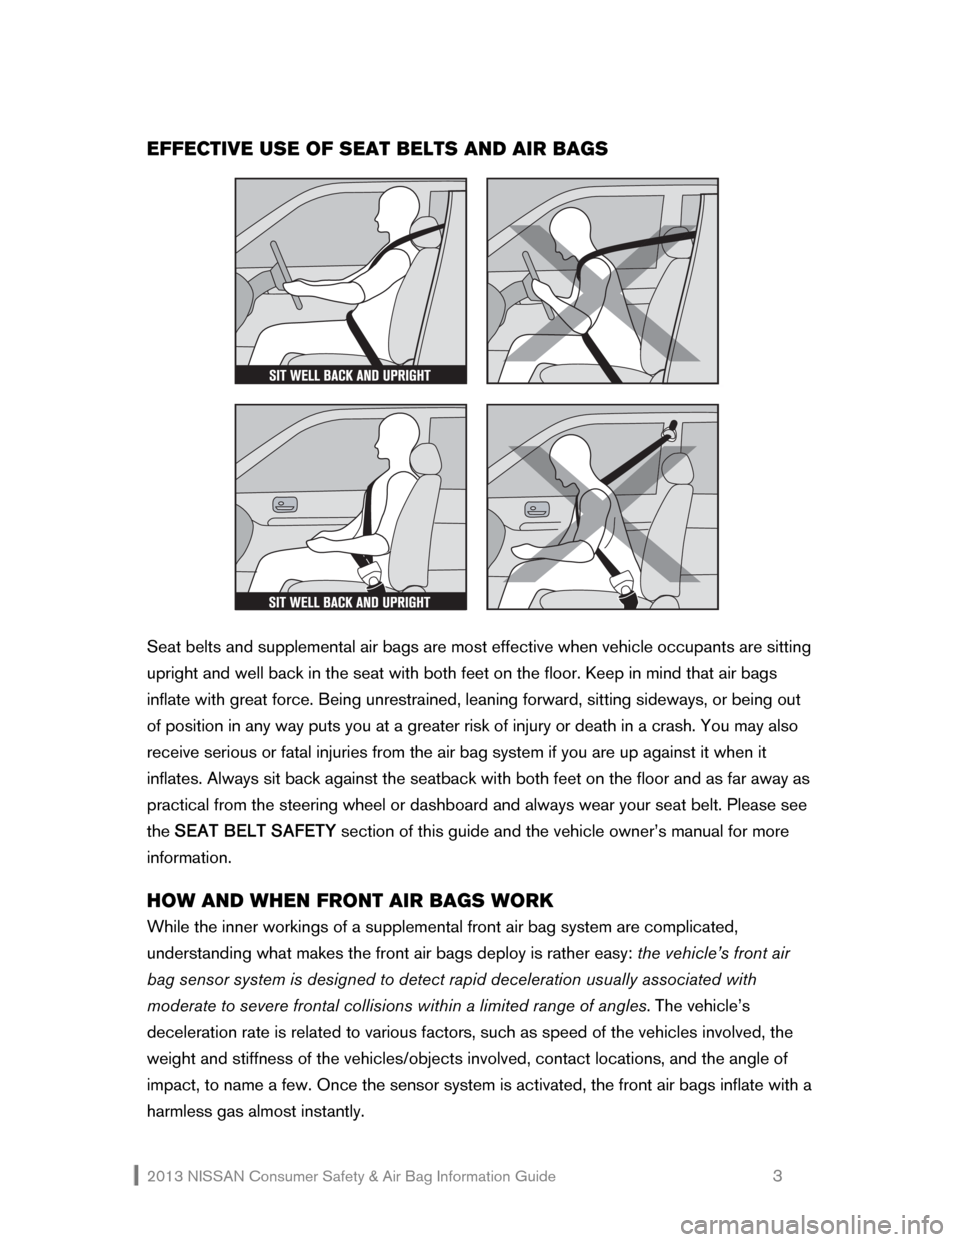 NISSAN 370Z ROADSTER 2013 Z34 Consumer Safety Air Bag Information Guide 2013 NISSAN Consumer Safety & Air Bag Information Guide                                                   3 
EFFECTIVE USE OF SEAT BELTS AND AIR BAGS 
 
 
 
Seat belts and supplemental air bags are mo